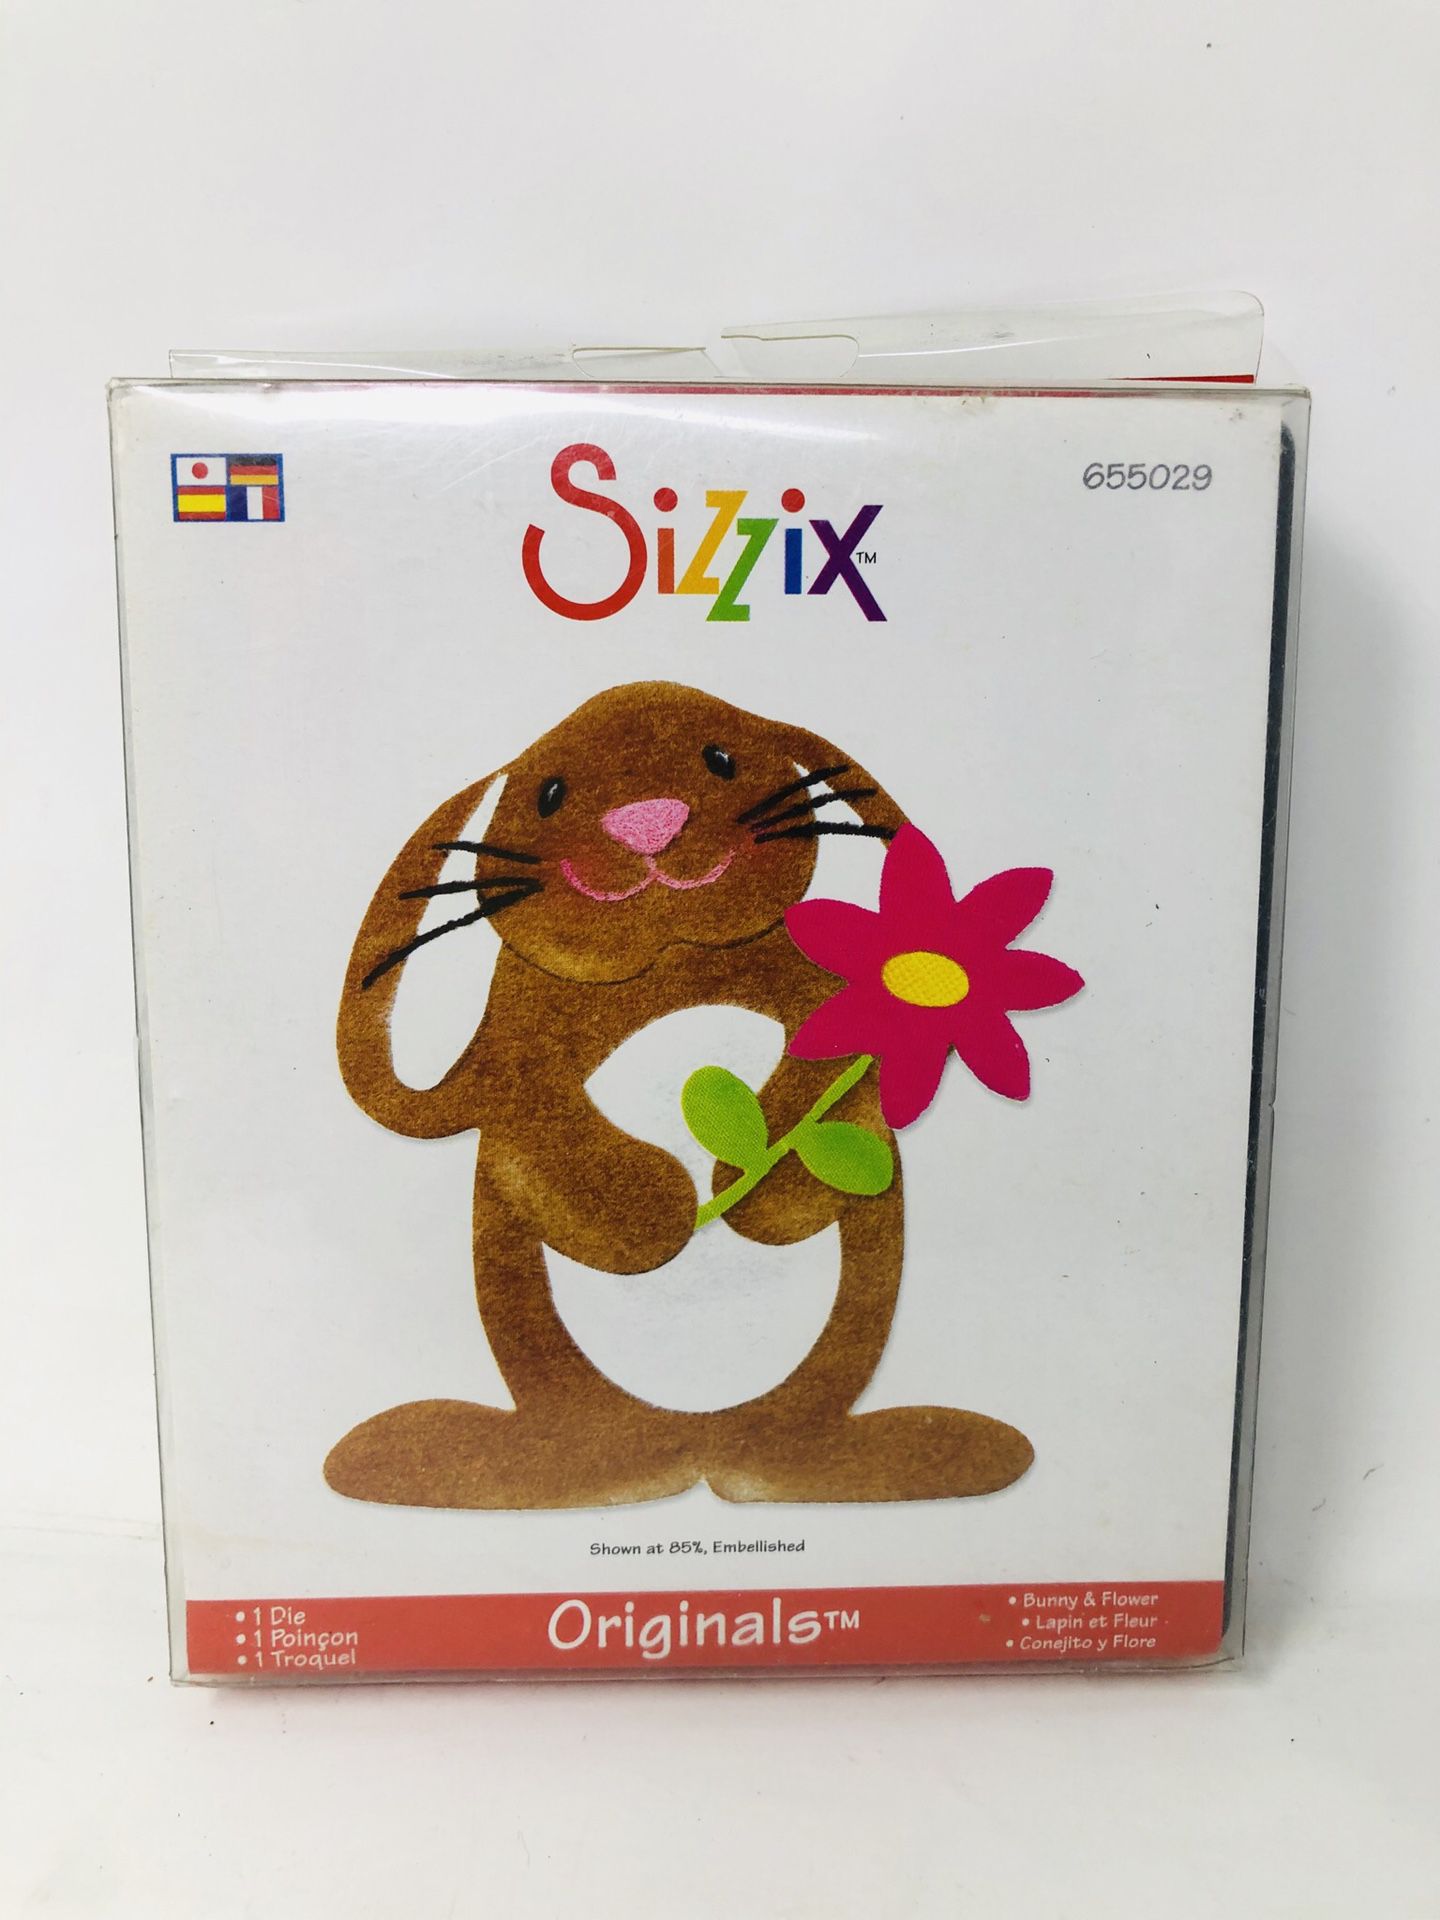 Sizzix bunny and flower